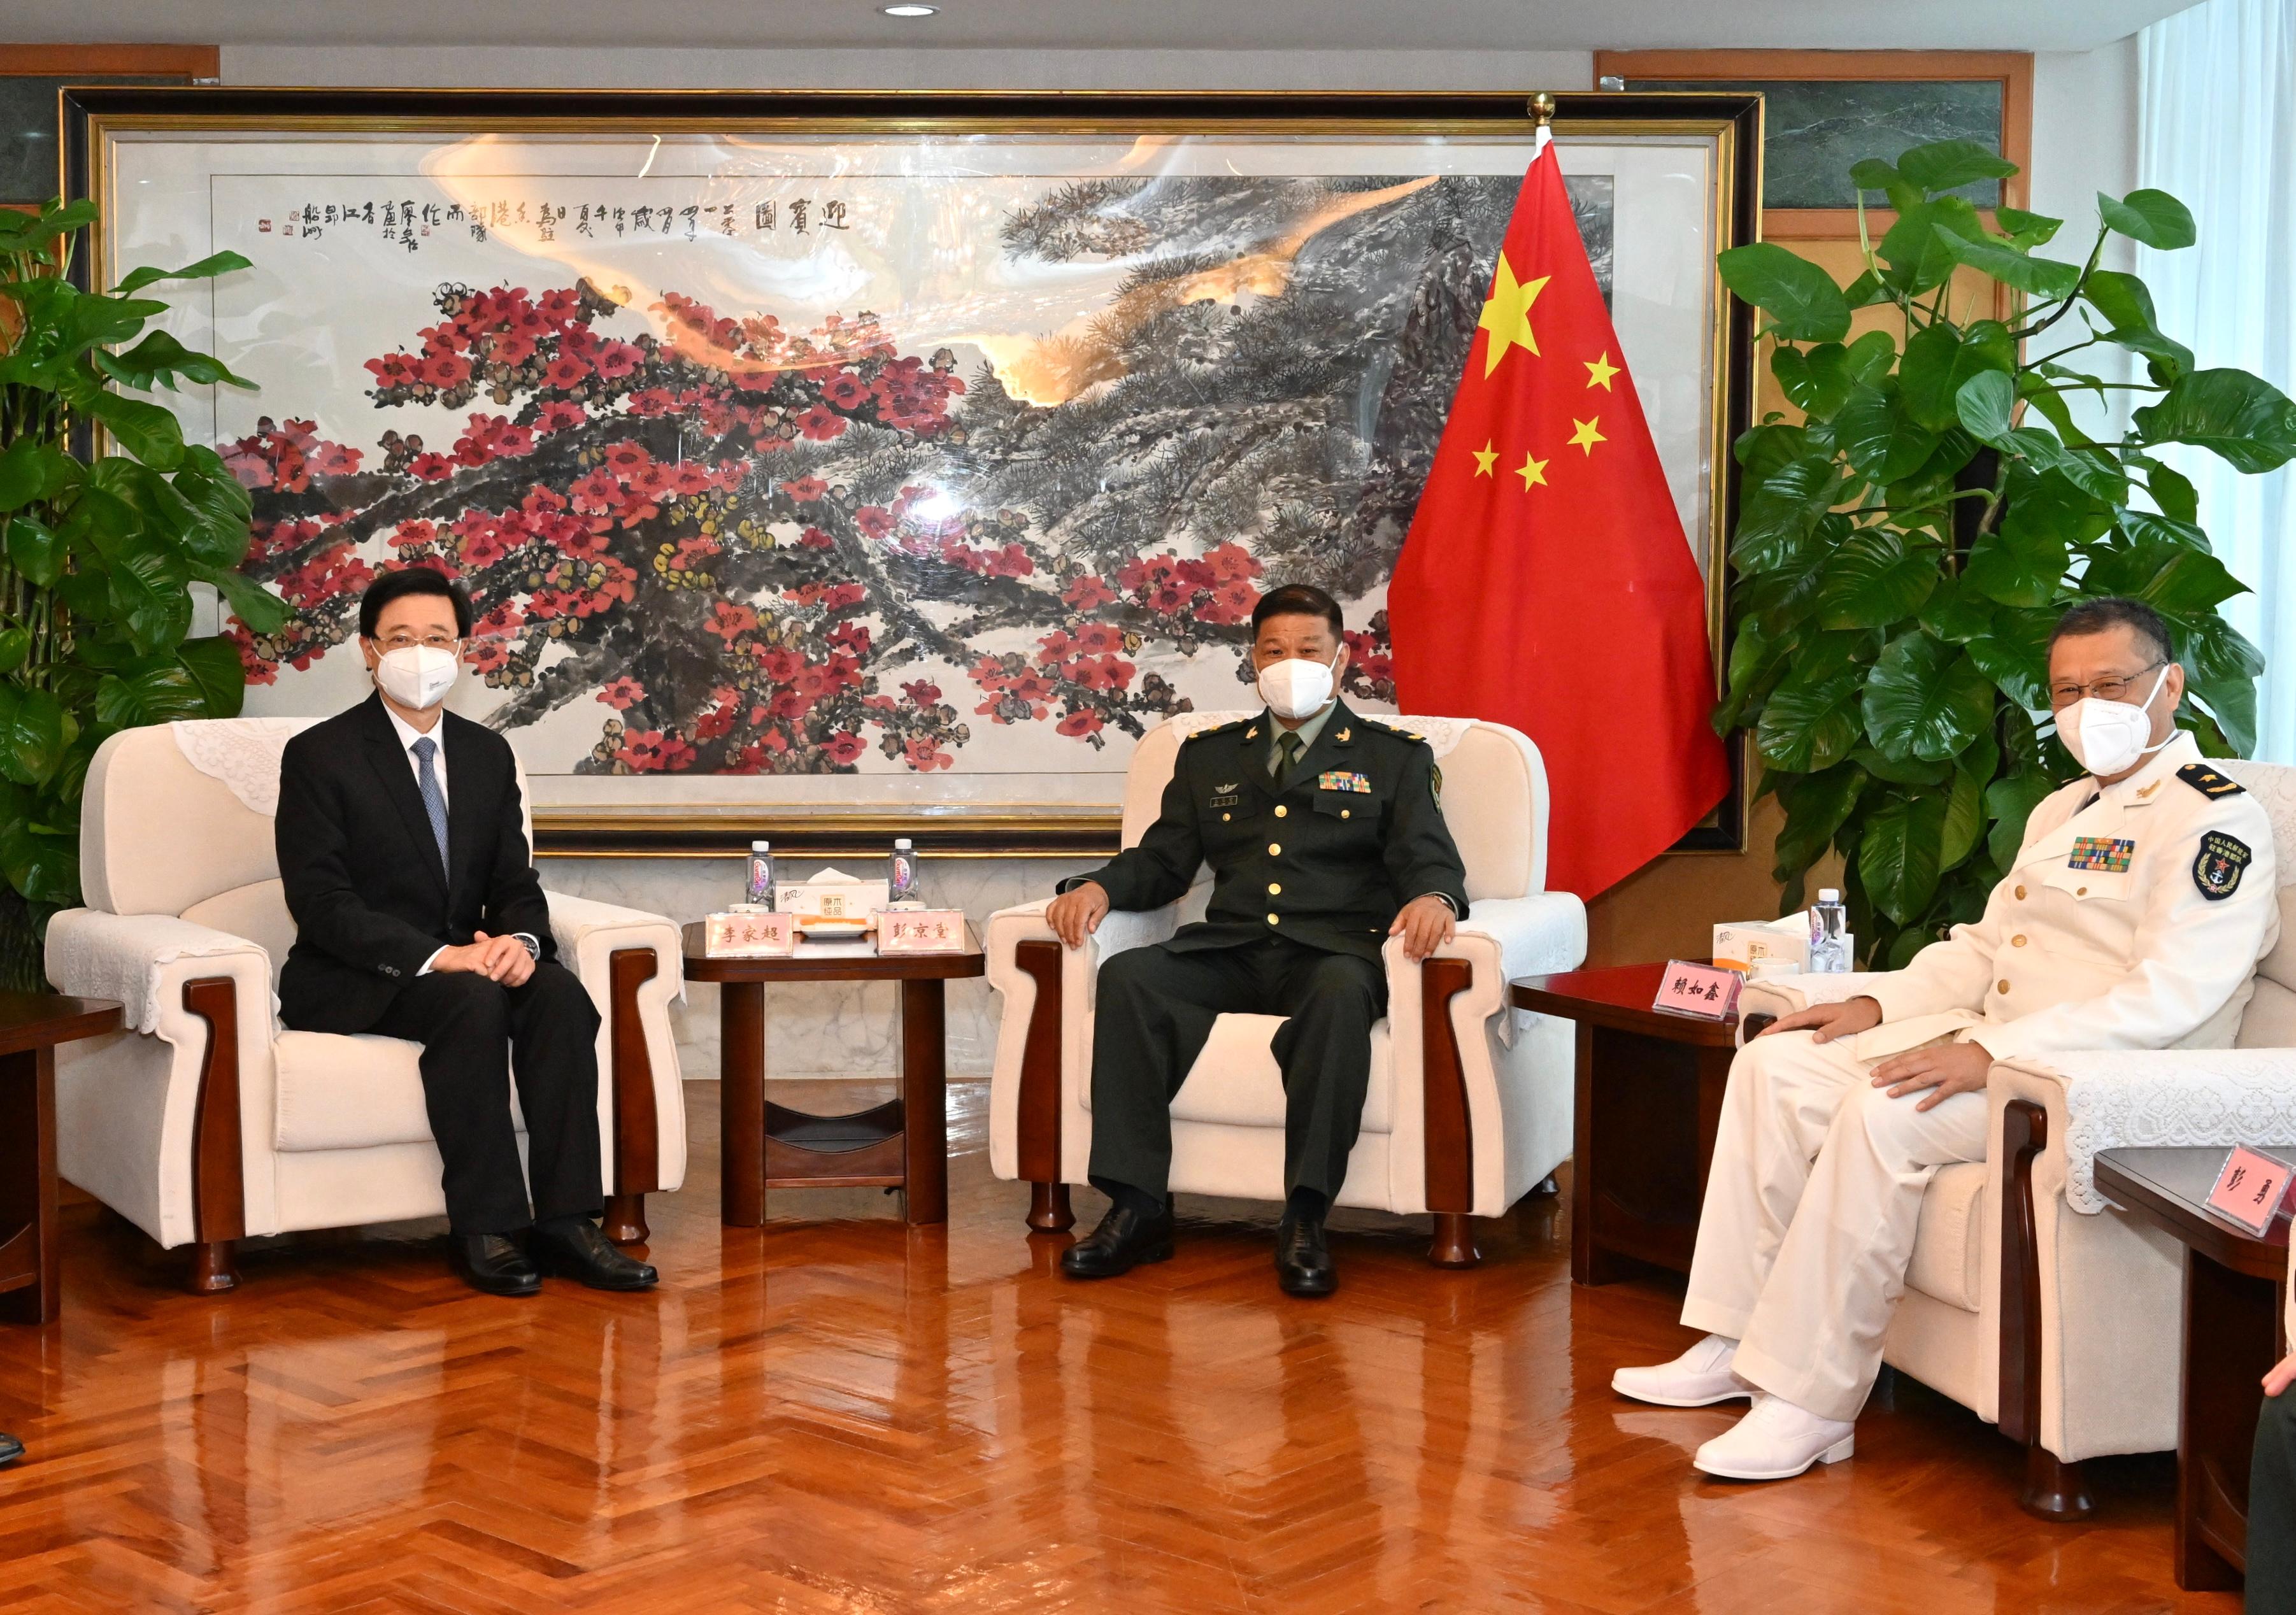 The Chief Executive-elect, Mr John Lee (left), pays a courtesy call on the Commander-in-chief of the Chinese People's Liberation Army (PLA) Hong Kong Garrison, Major General Peng Jingtang (centre) and the Political Commissar of the PLA Hong Kong Garrison, Navy Rear Admiral Lai Ruxin (right), this afternoon (May 9).